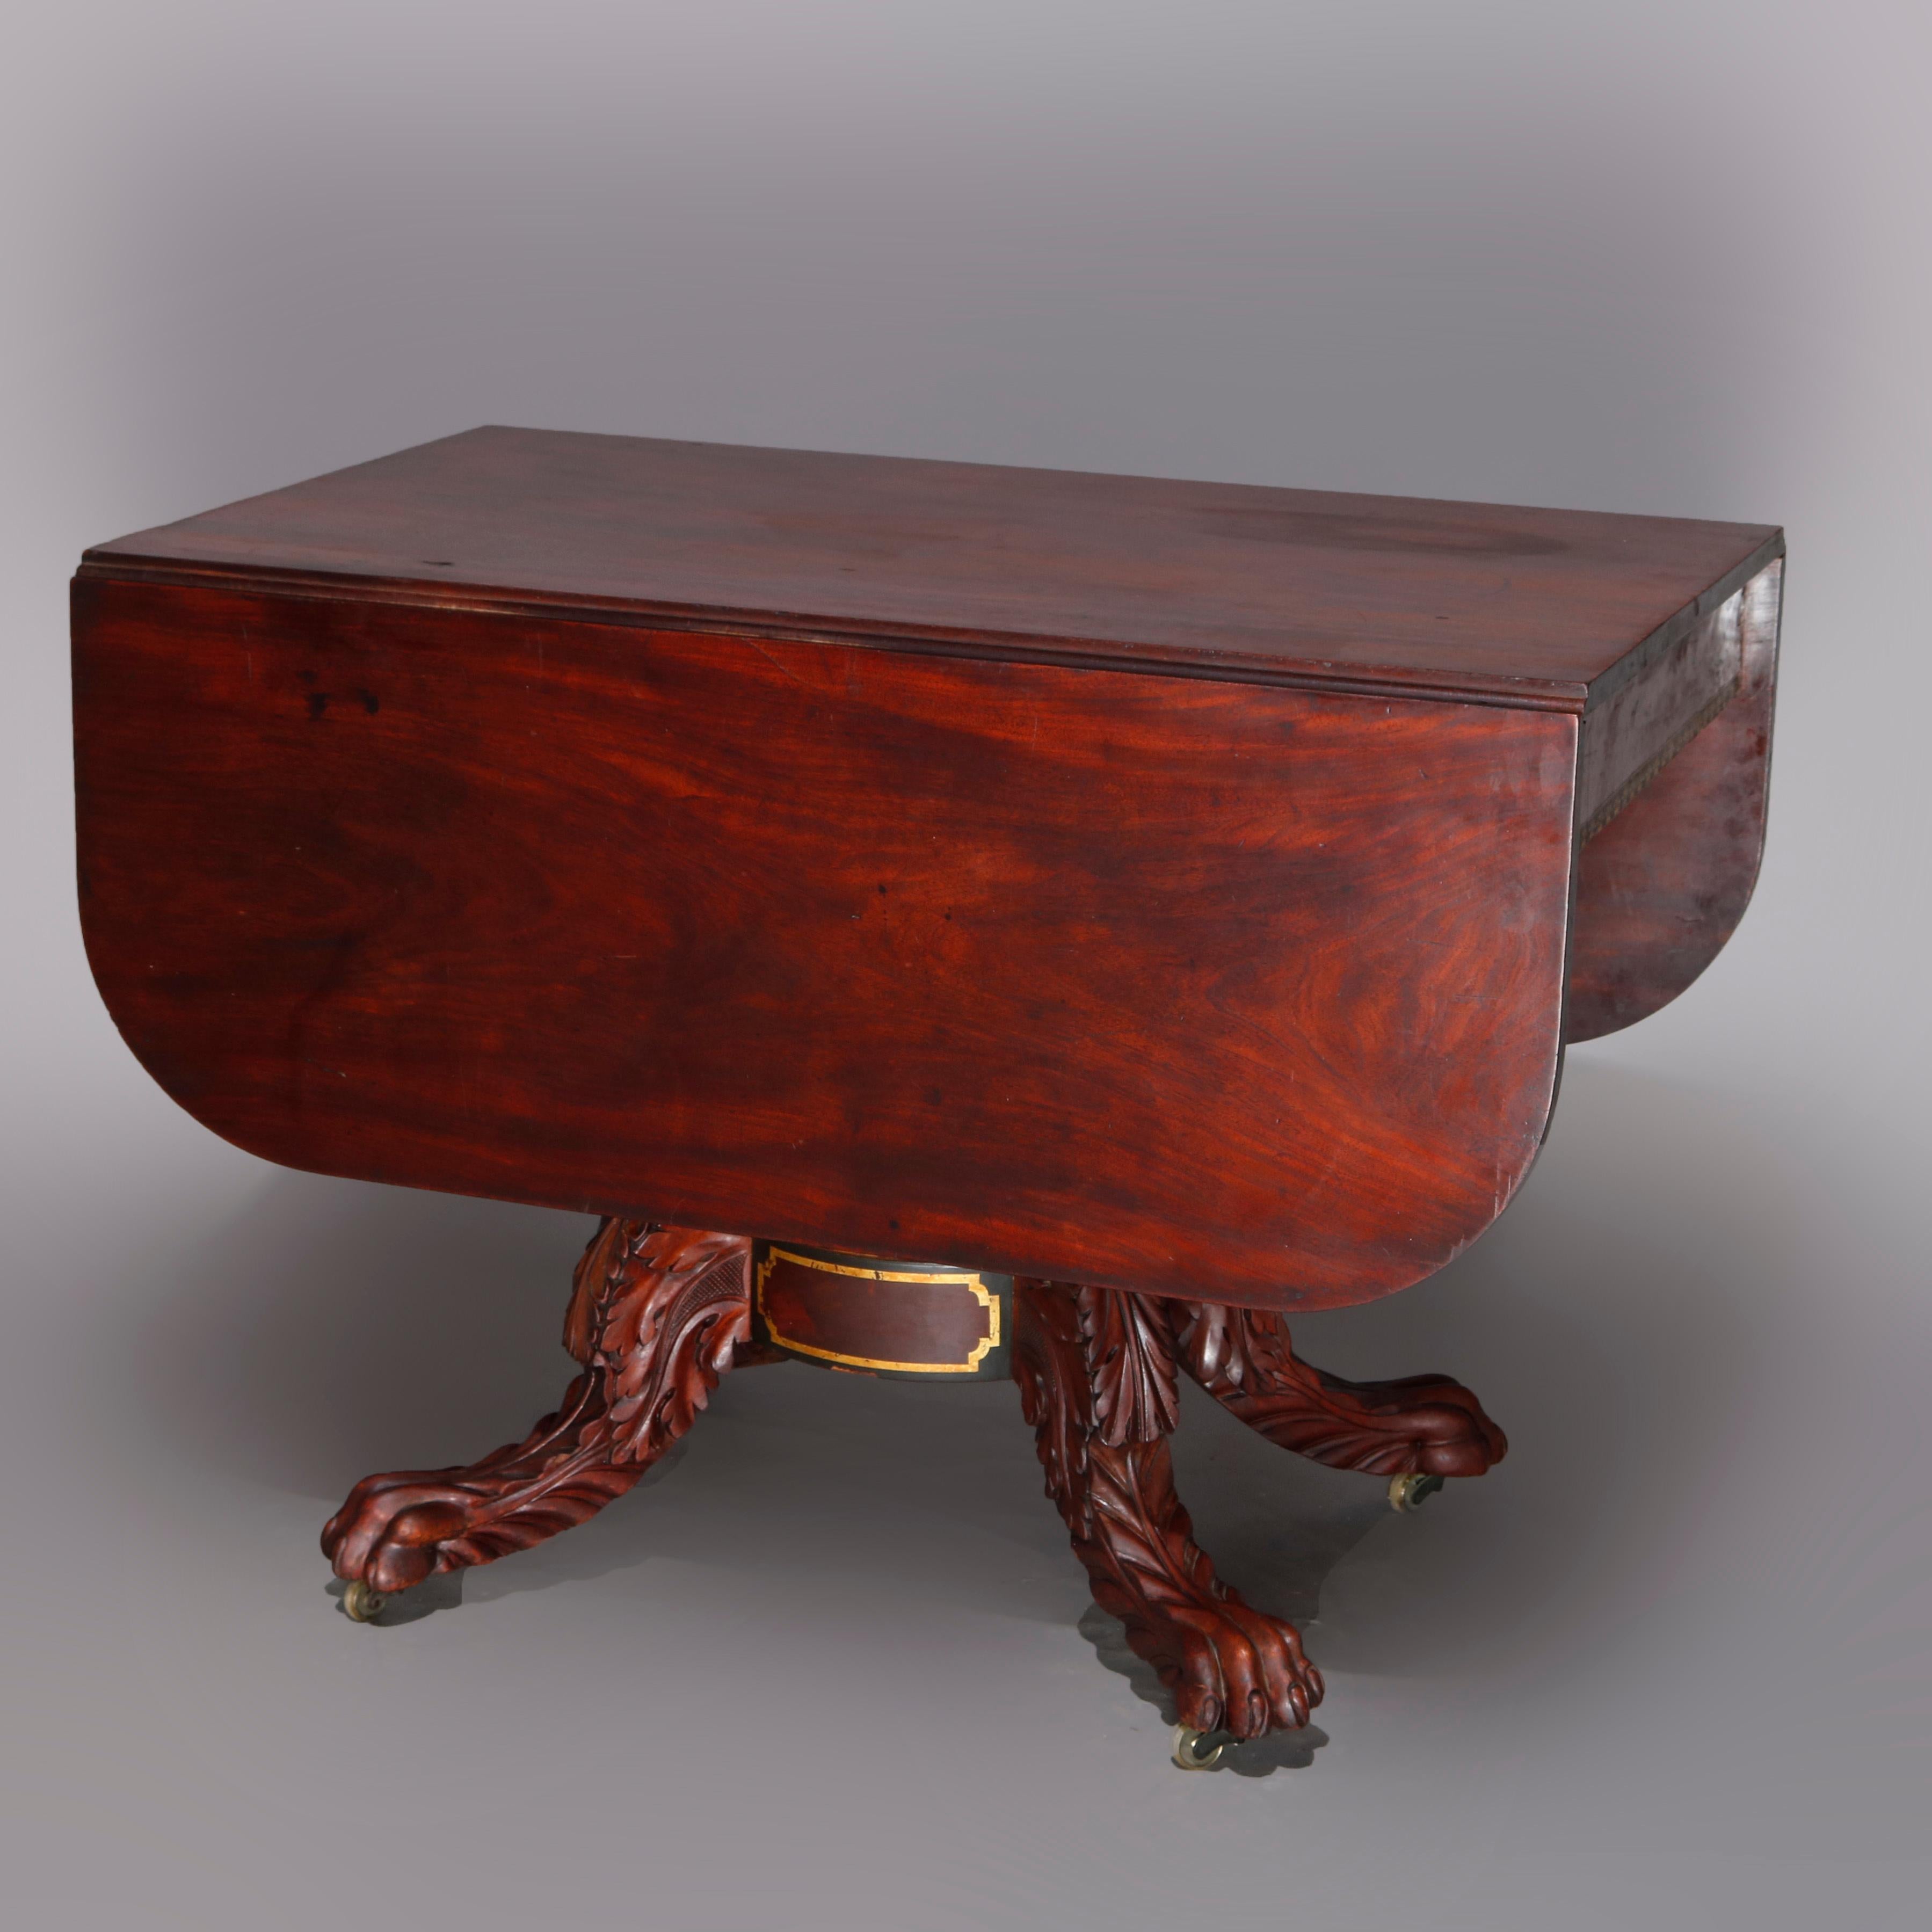 An American Empire Classical drop-leaf table in the manner of Joseph Meeks offers deeply striated flame mahogany construction with single drawer over faceted column base raised on acanthus carved legs terminating in paw feet, gilt stenciling